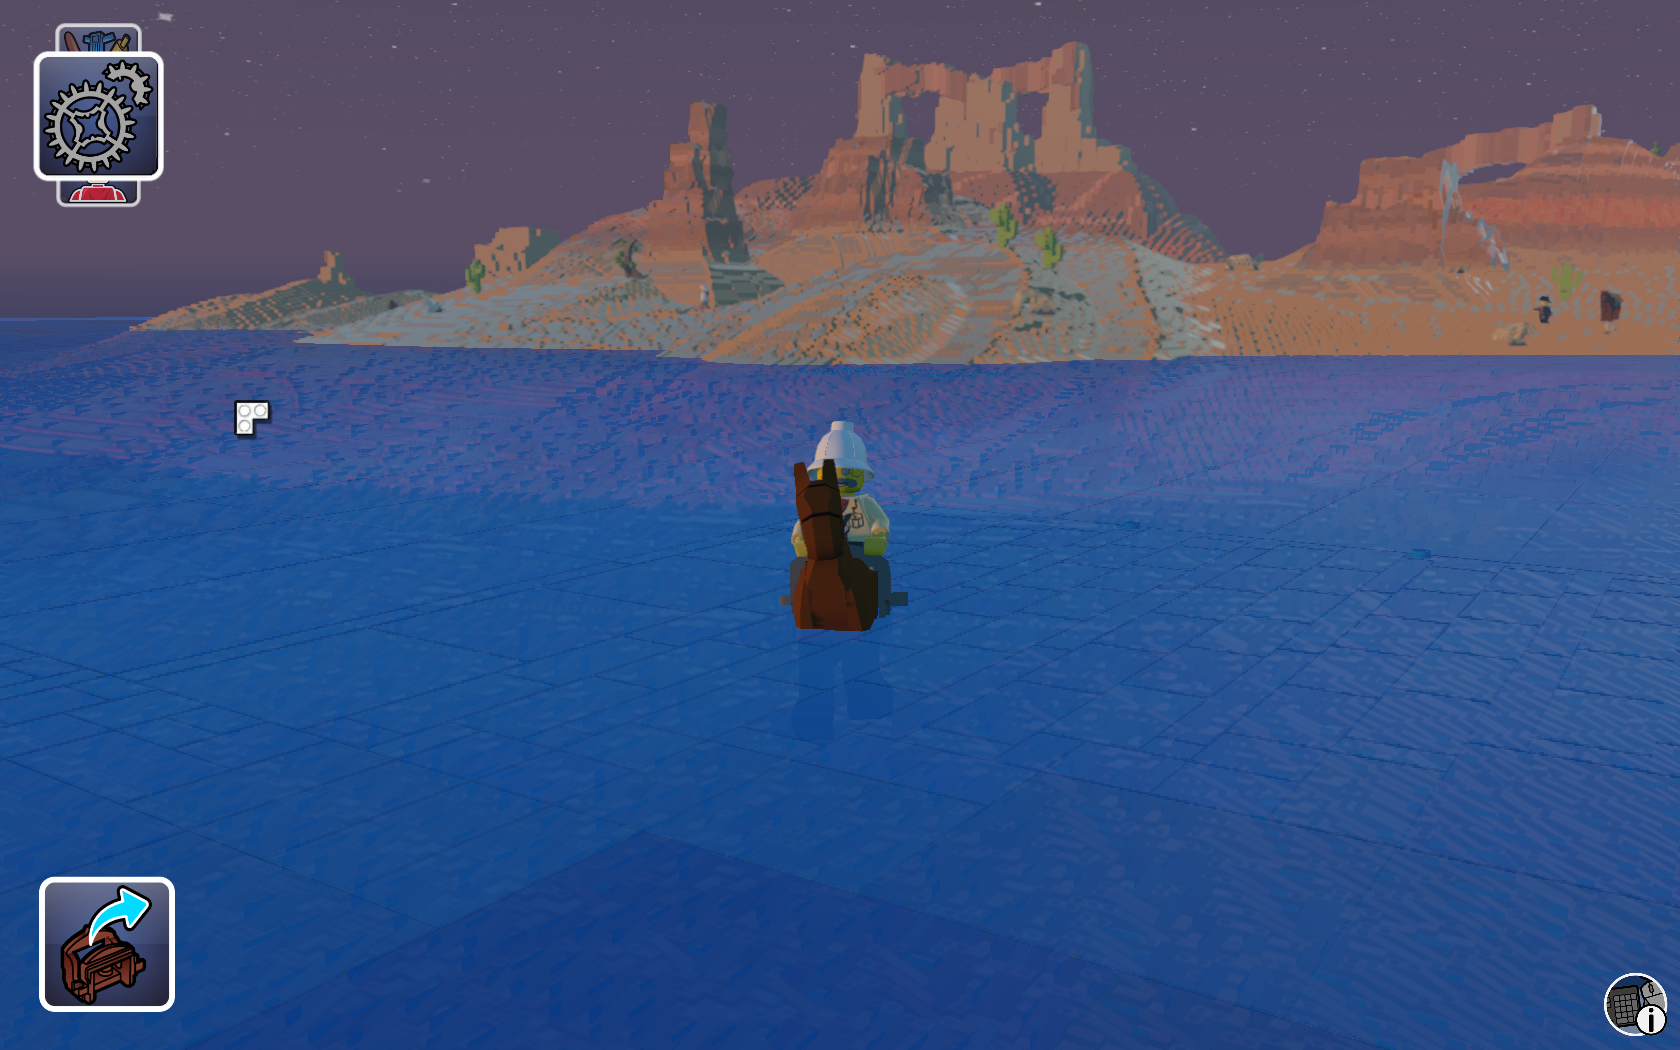 lego_worlds2015-06-02k7sh2.png